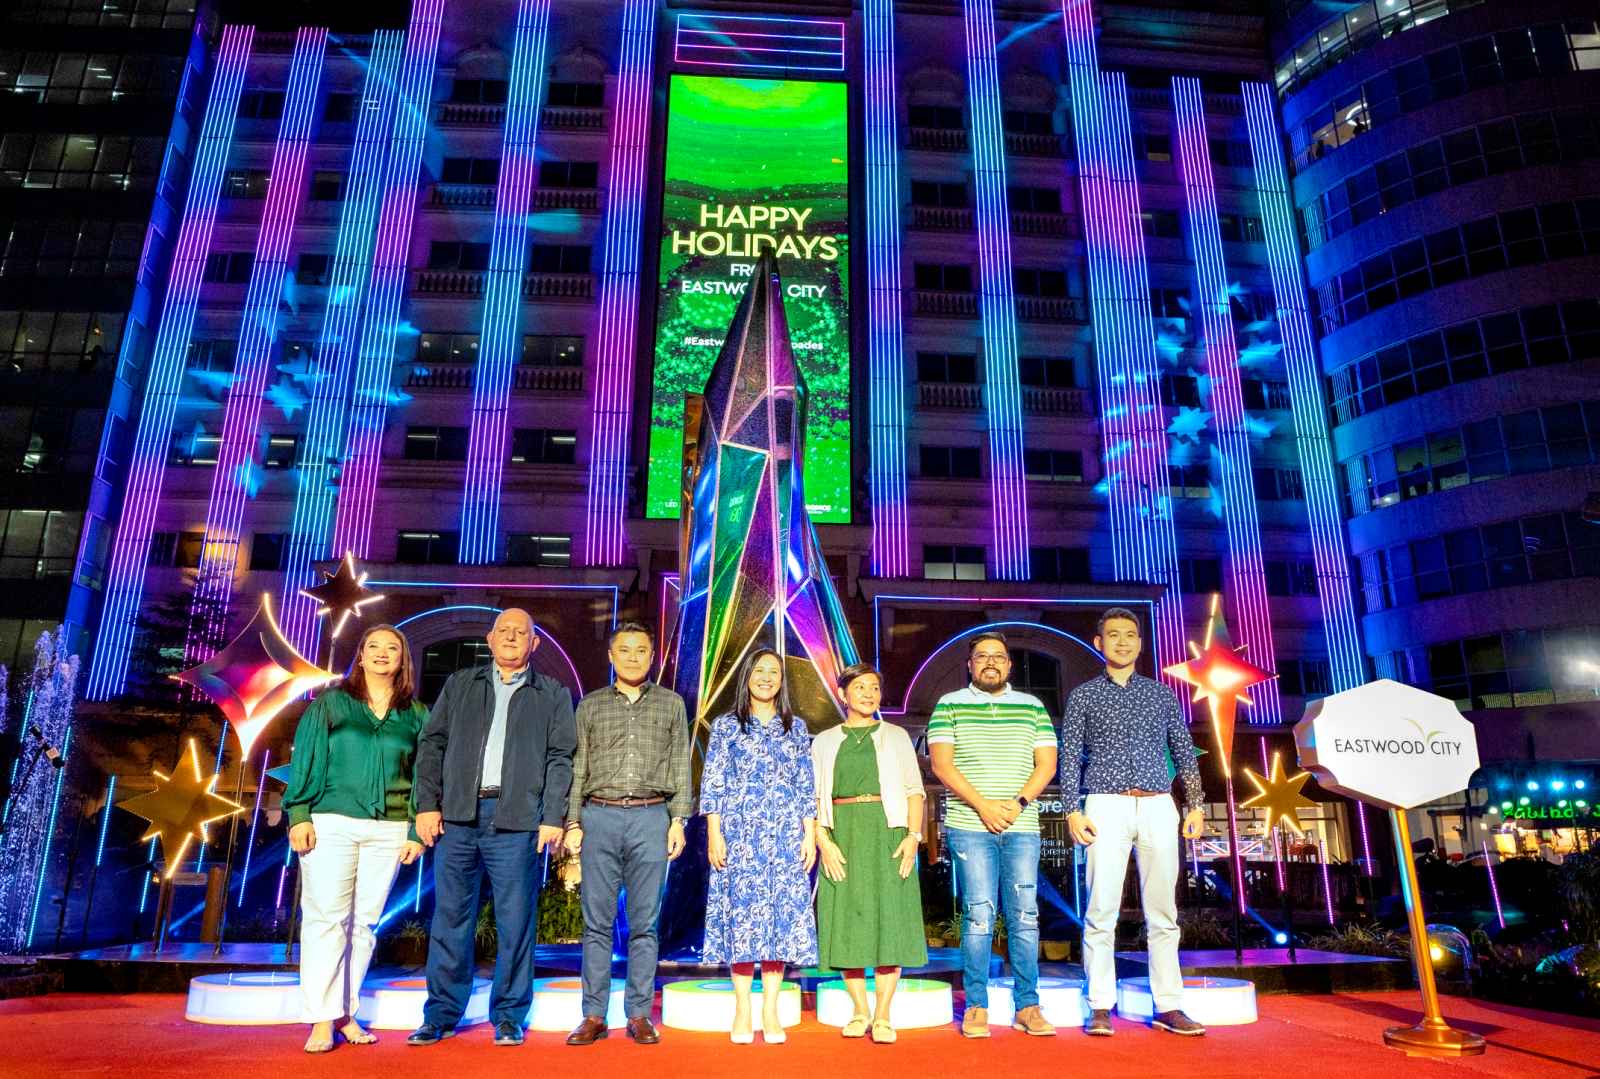 Eastwood City dazzles with Biggest and Brightest Light Show in the Country